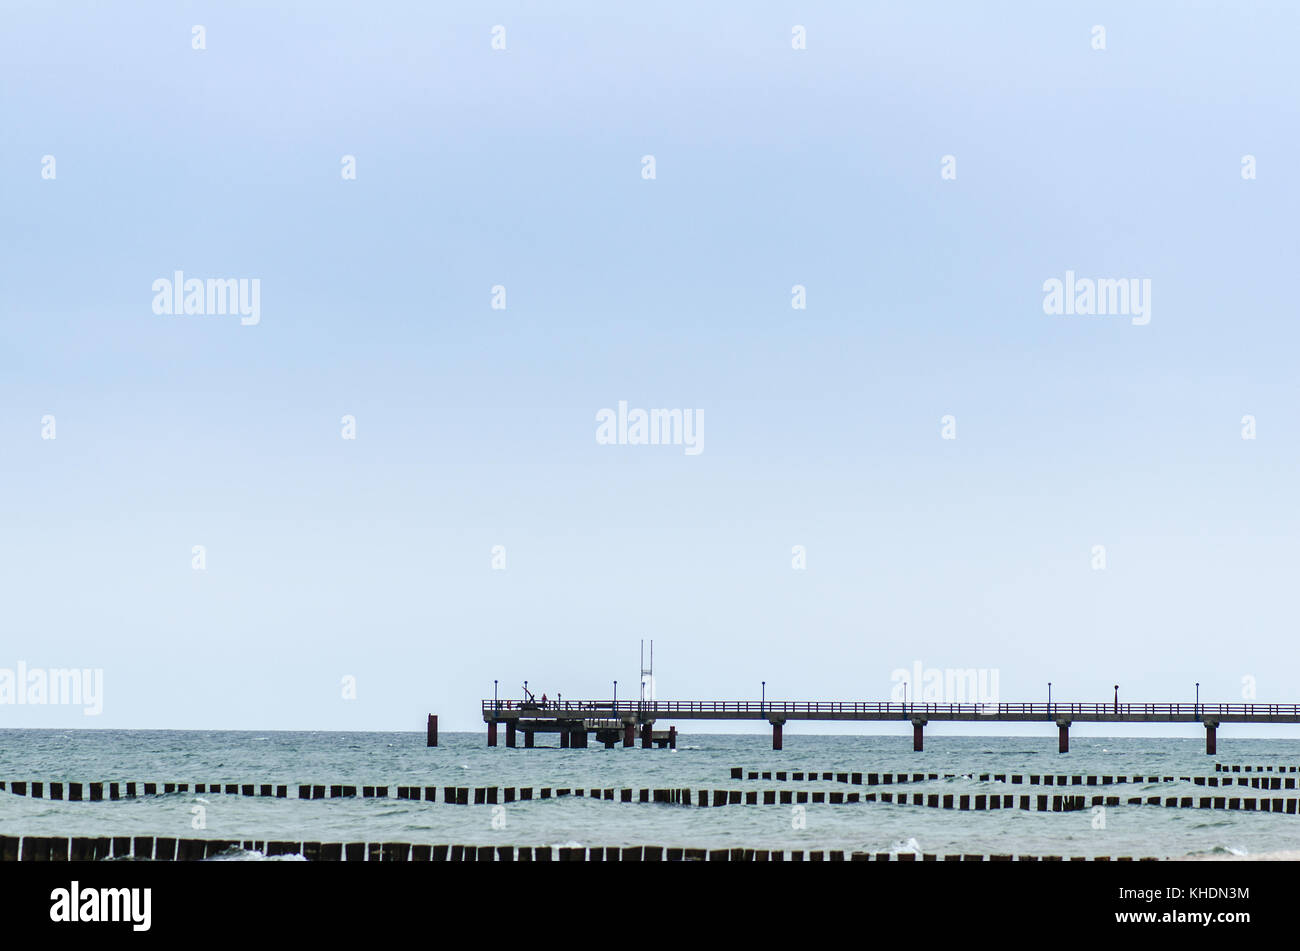 baltic sea with wooden pier and groyne field Stock Photo